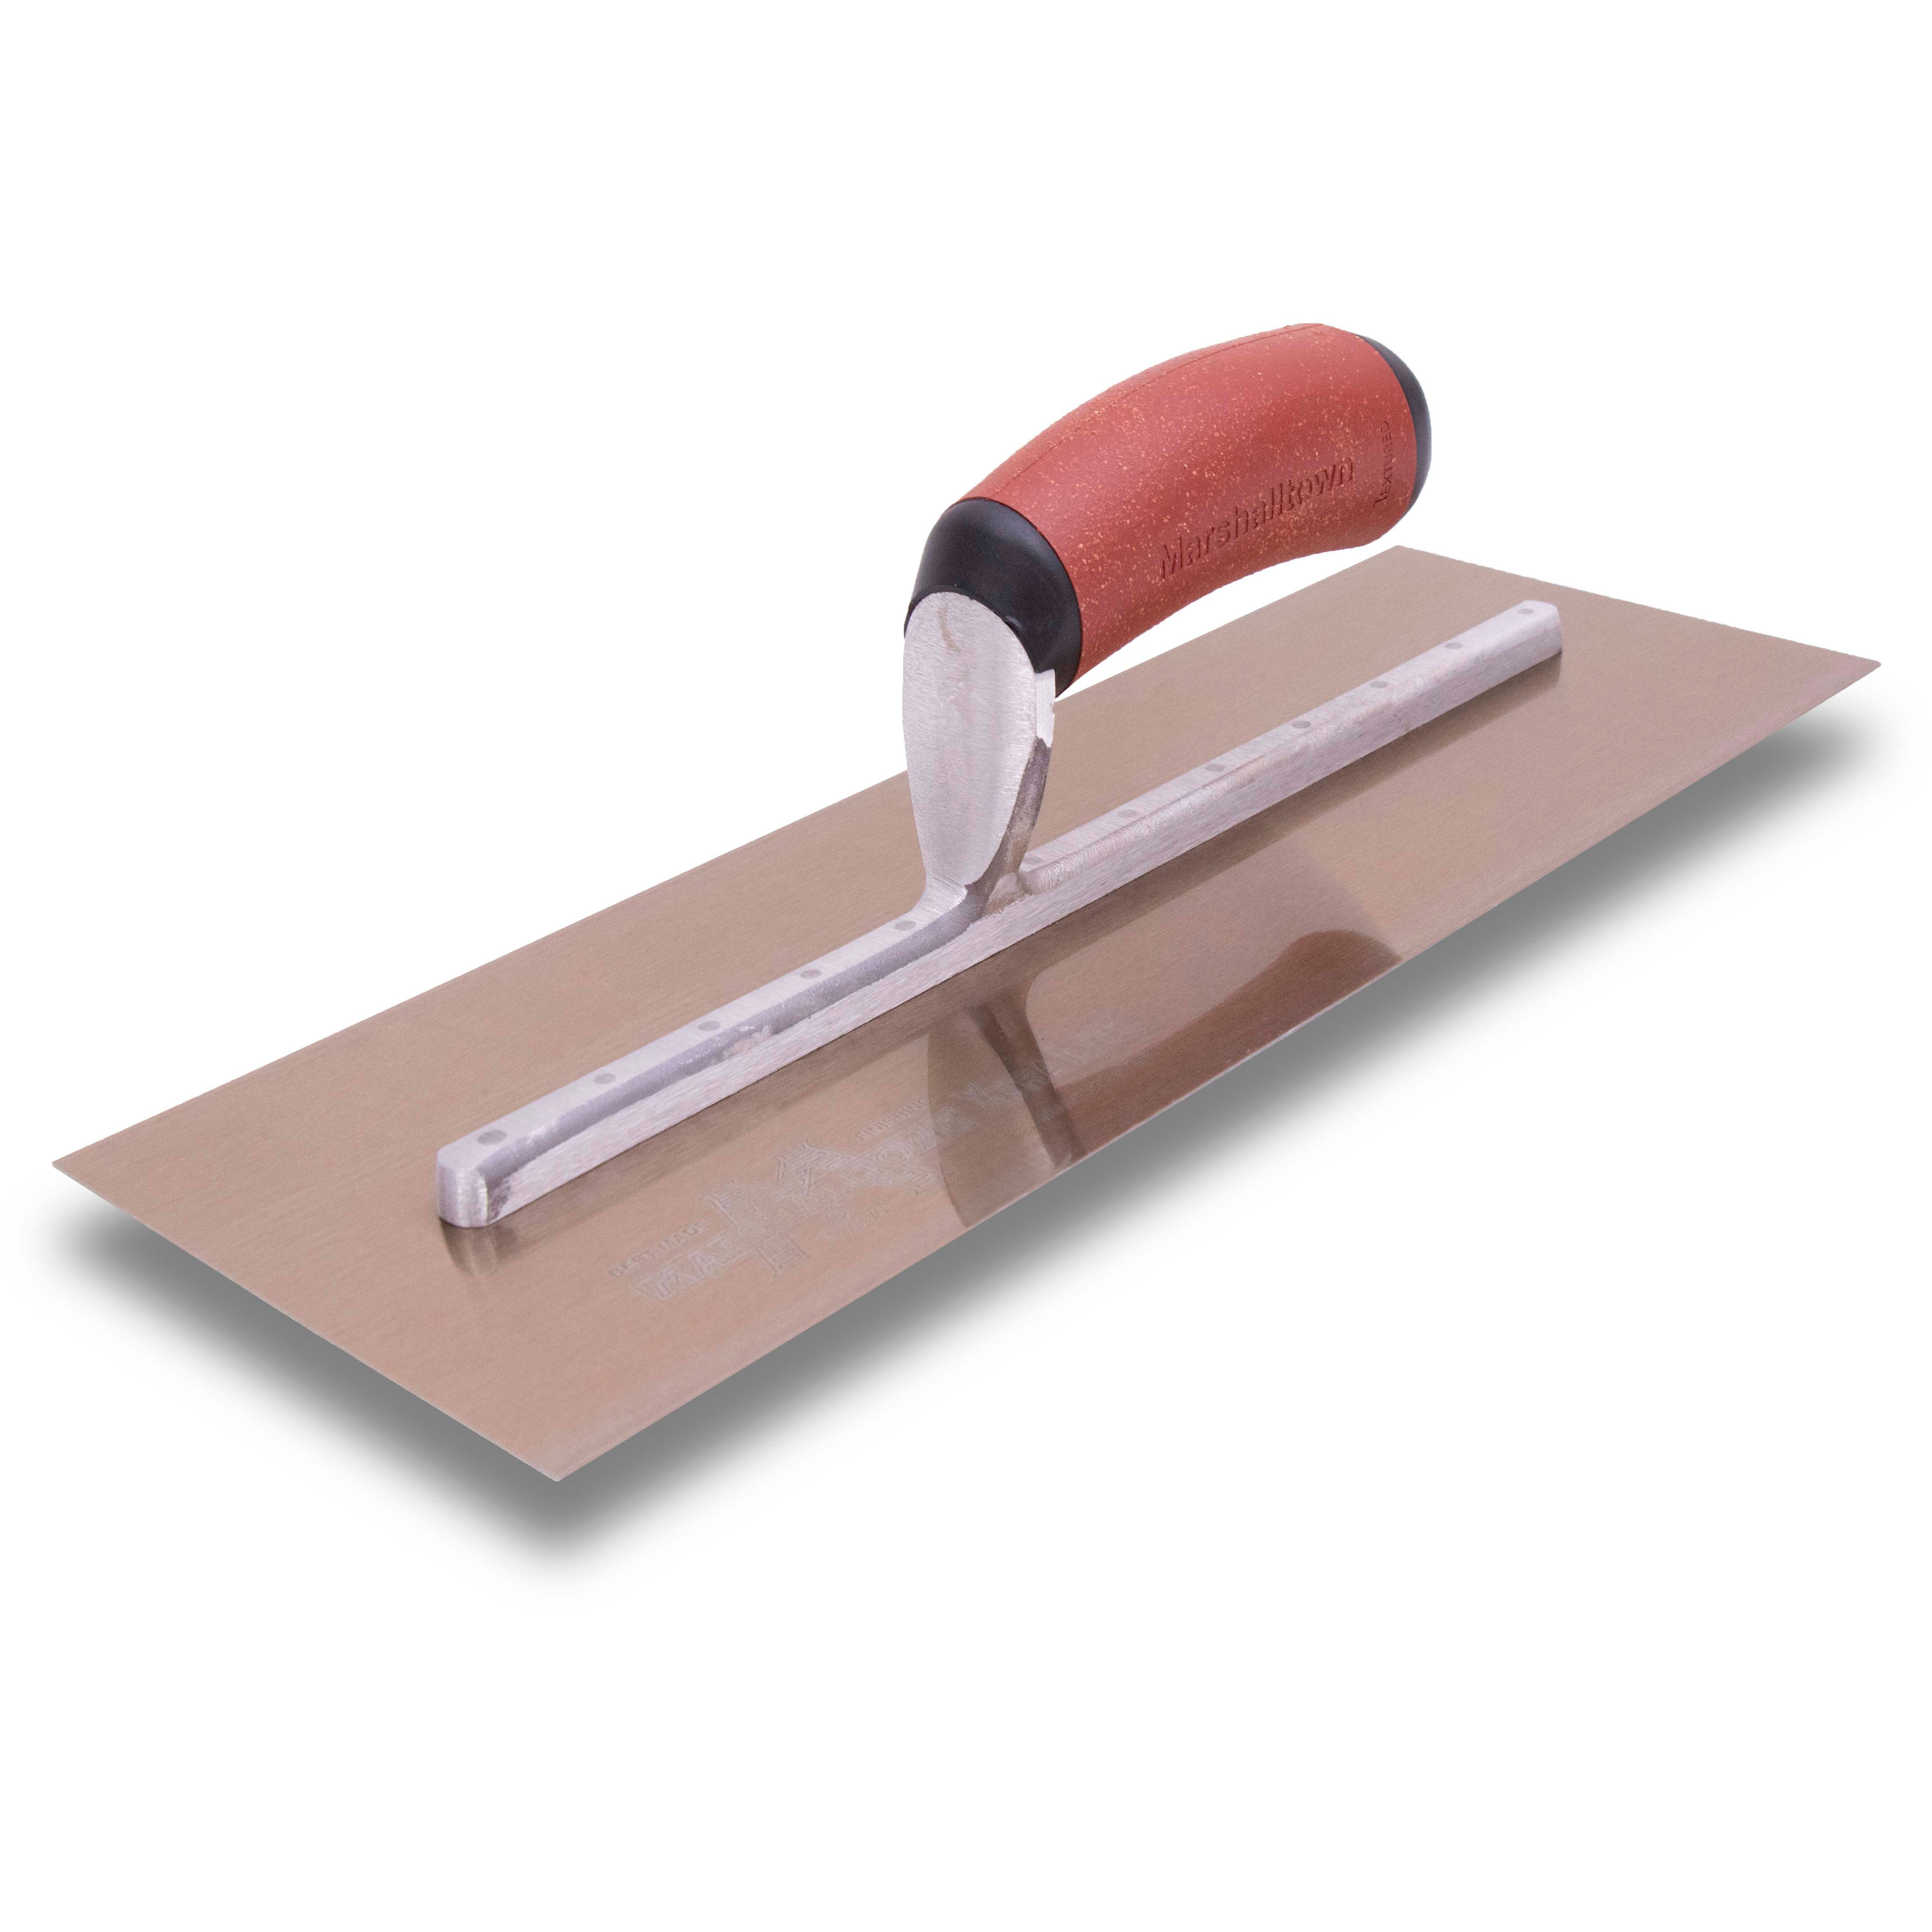 Marshalltown MXS67GSDC 16in x 4-1/2in Golden Stainless Finishing Trowel with DuraCork Handle MXS67GSDC